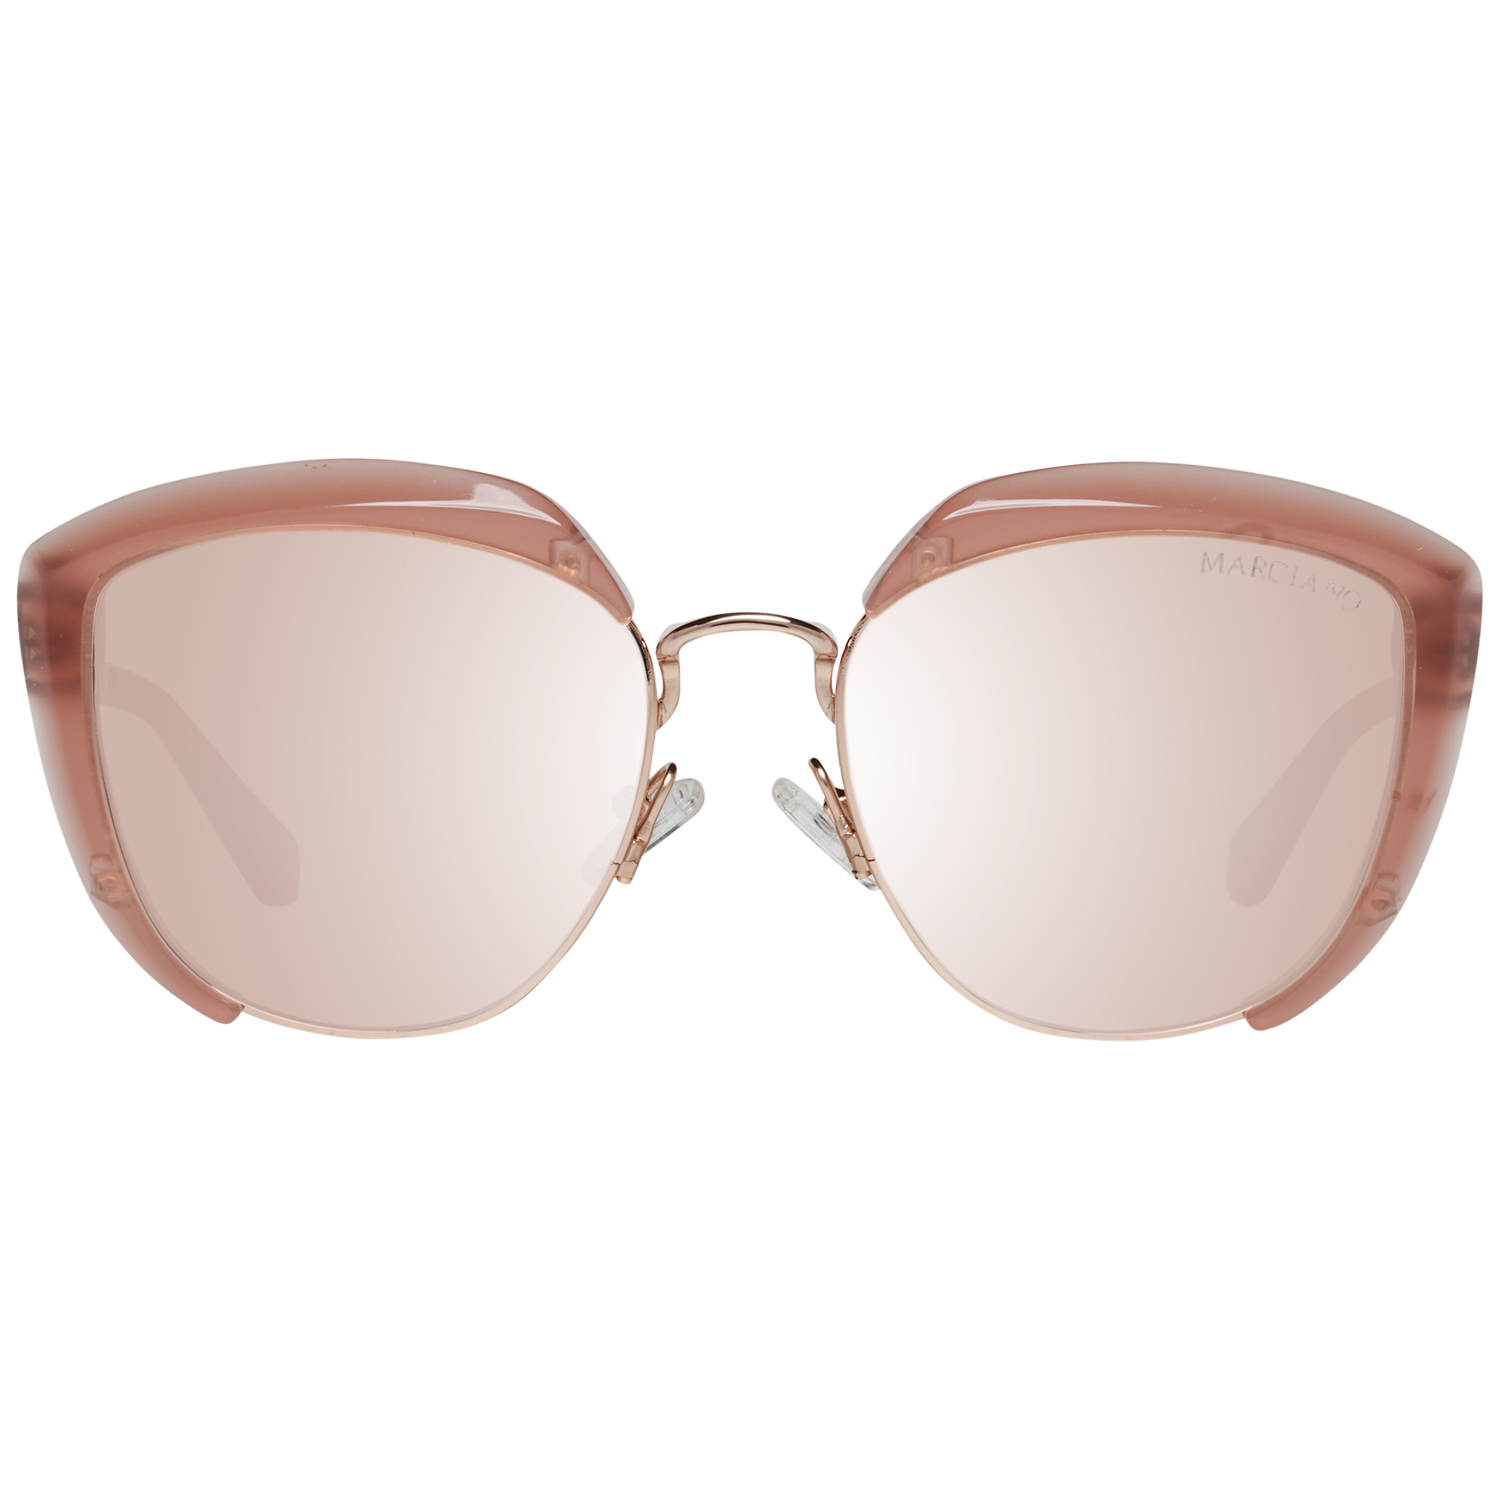 Guess by Marciano Sunglasses GM0791 72Z 54 Women
Frame color: Rose Gold
Lenses color: Rosé Gold
Lenses material: Plastic
Filter category: 2
Style: Cat Eye
Lenses effect: Mirrored
Protection: 100% UVA & UVB
Size: 54-18-140
Lenses width: 54
Lenses height: 48
Bridge width: 18
Frame width: 140
Temples length: 140
Shipment includes: Case, cleaning cloth
Spring hinge: No